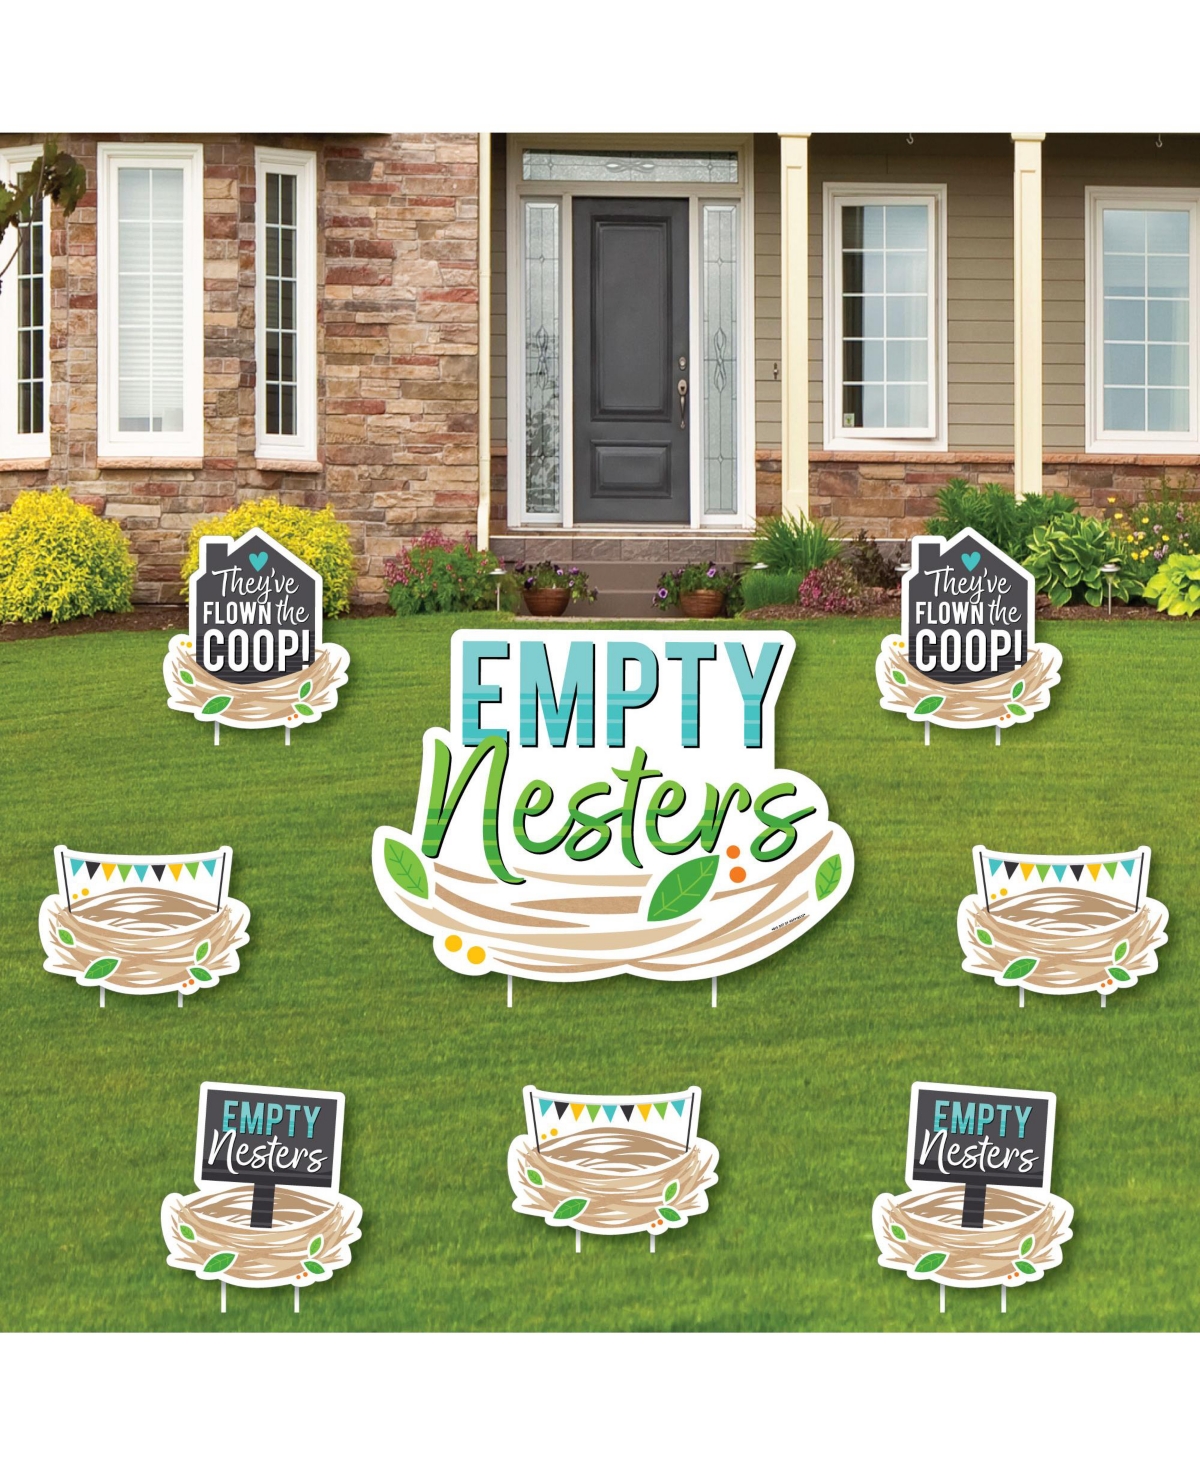 Empty Nesters - Outdoor Lawn Decorations - Empty Nest Party Yard Signs - 8 Ct